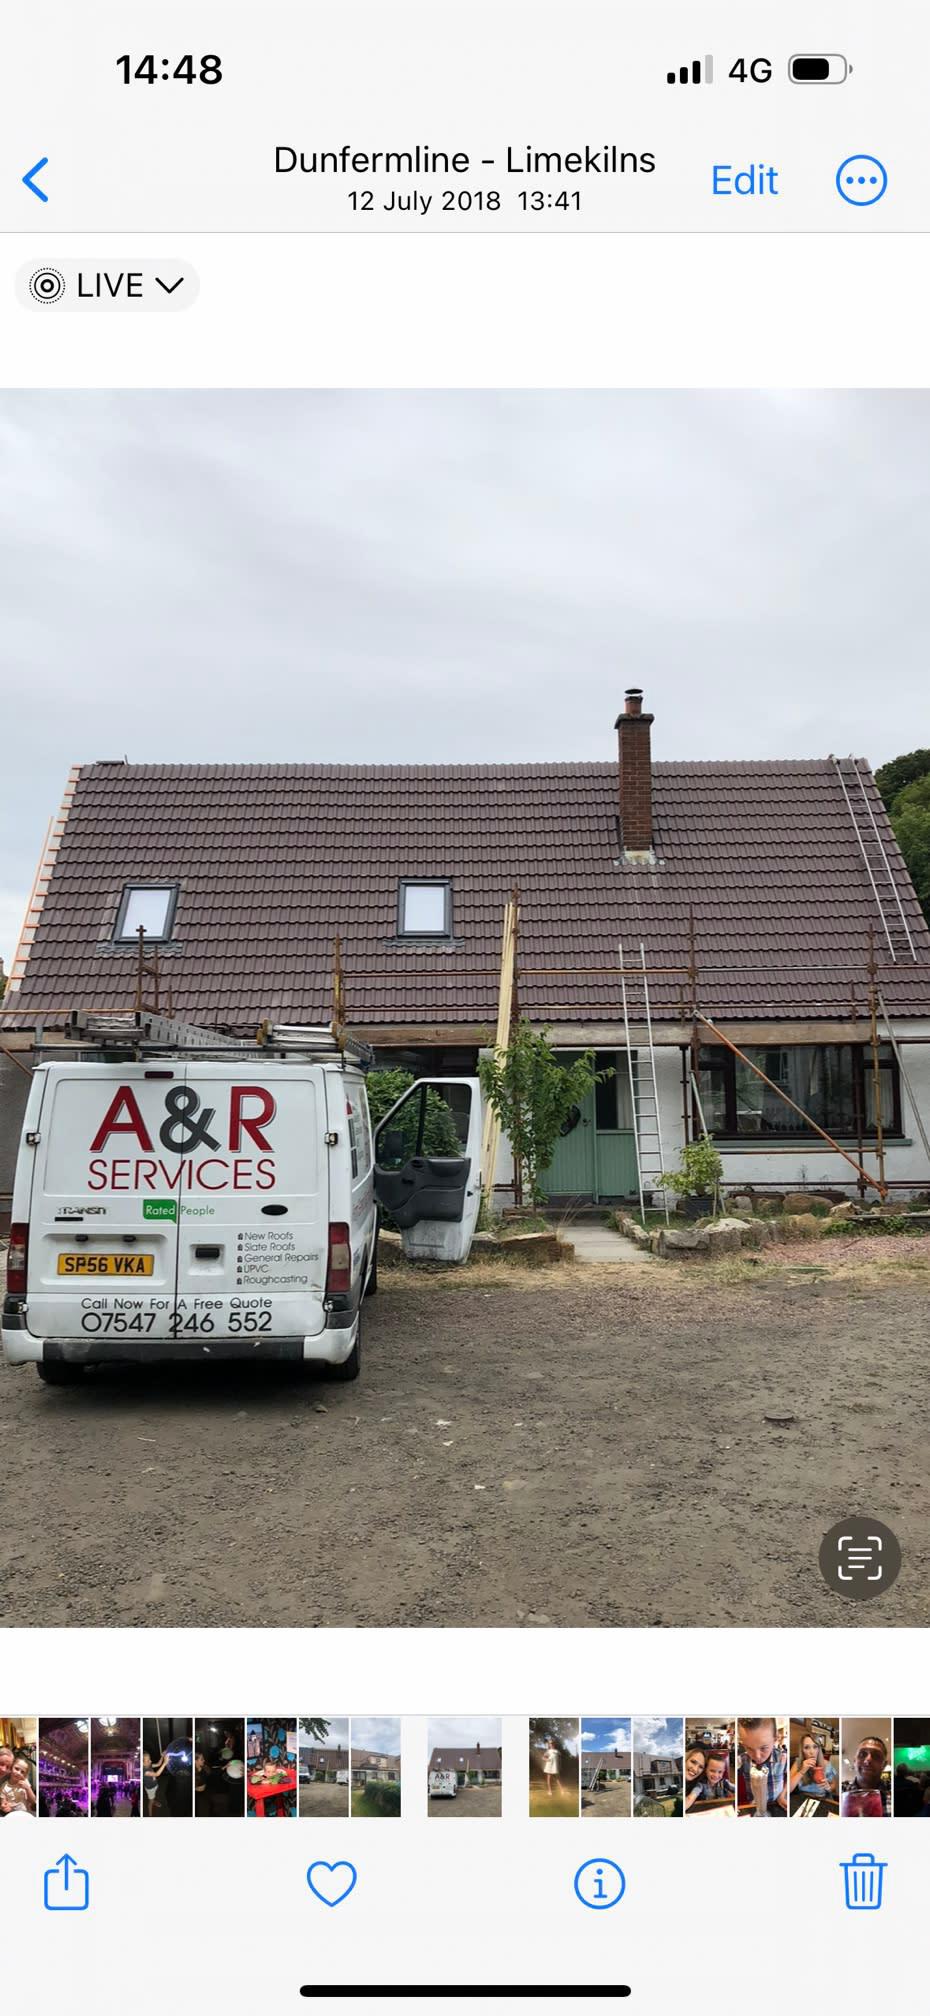 Images A & R Roofing Services Ltd